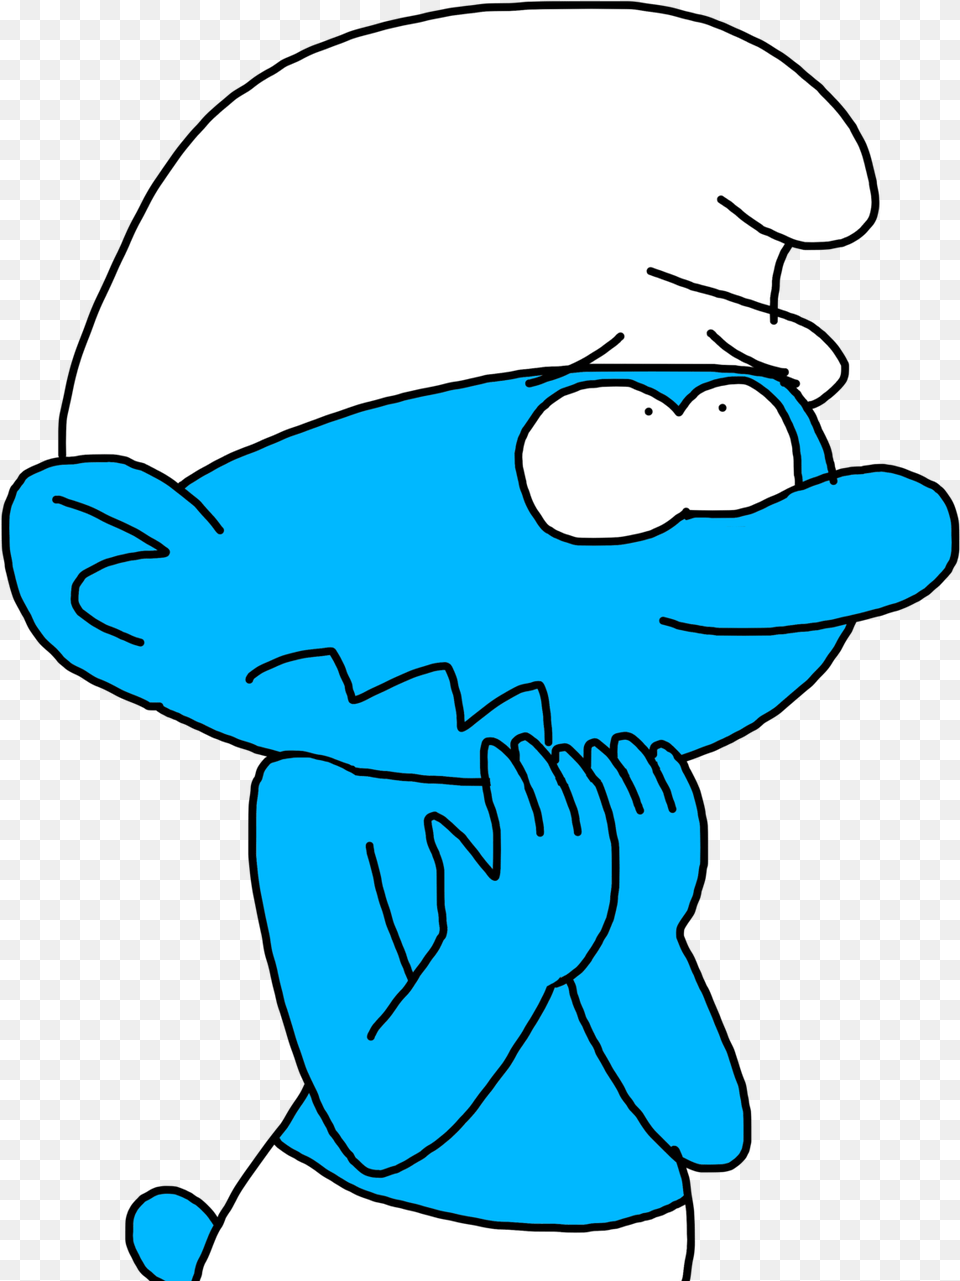 Scaredy Smurf By Marcospower1996 Scaredy Smurf By, Baby, Person, Cartoon Free Transparent Png